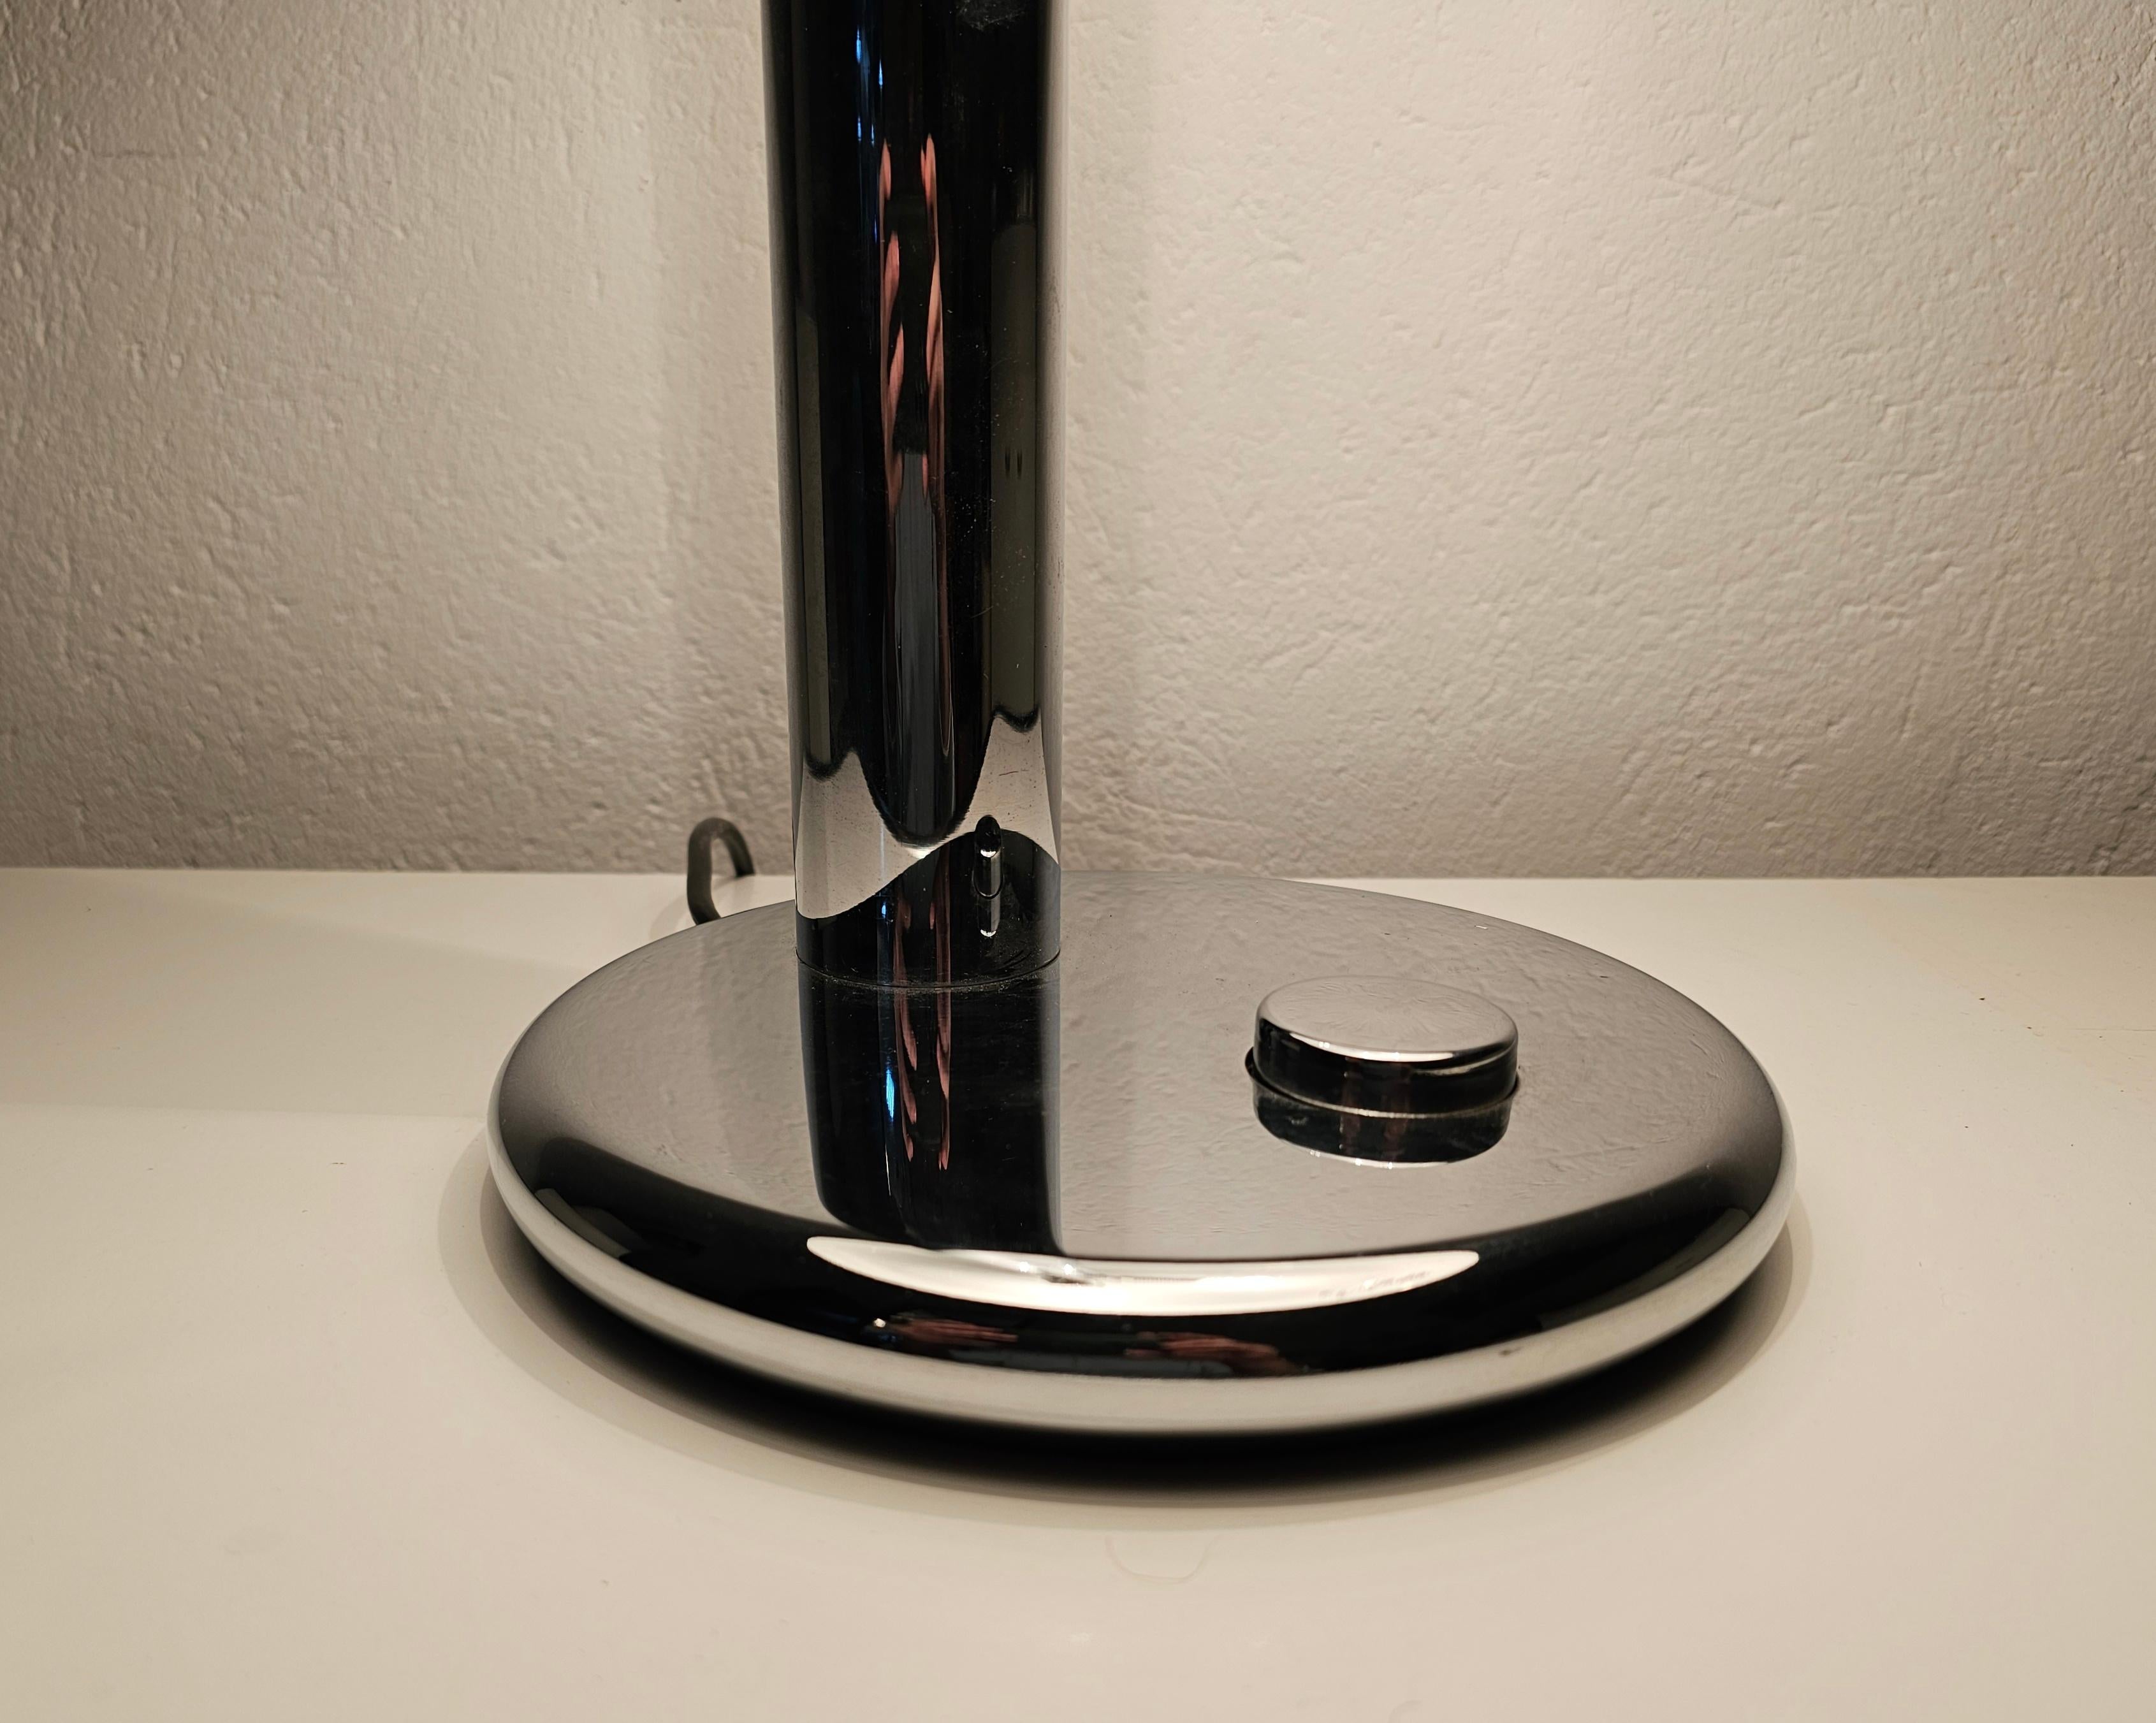 Bauhaus Style Table Lamp Model 7603 designed by Heinz Pfaender for Hillebrand  For Sale 1